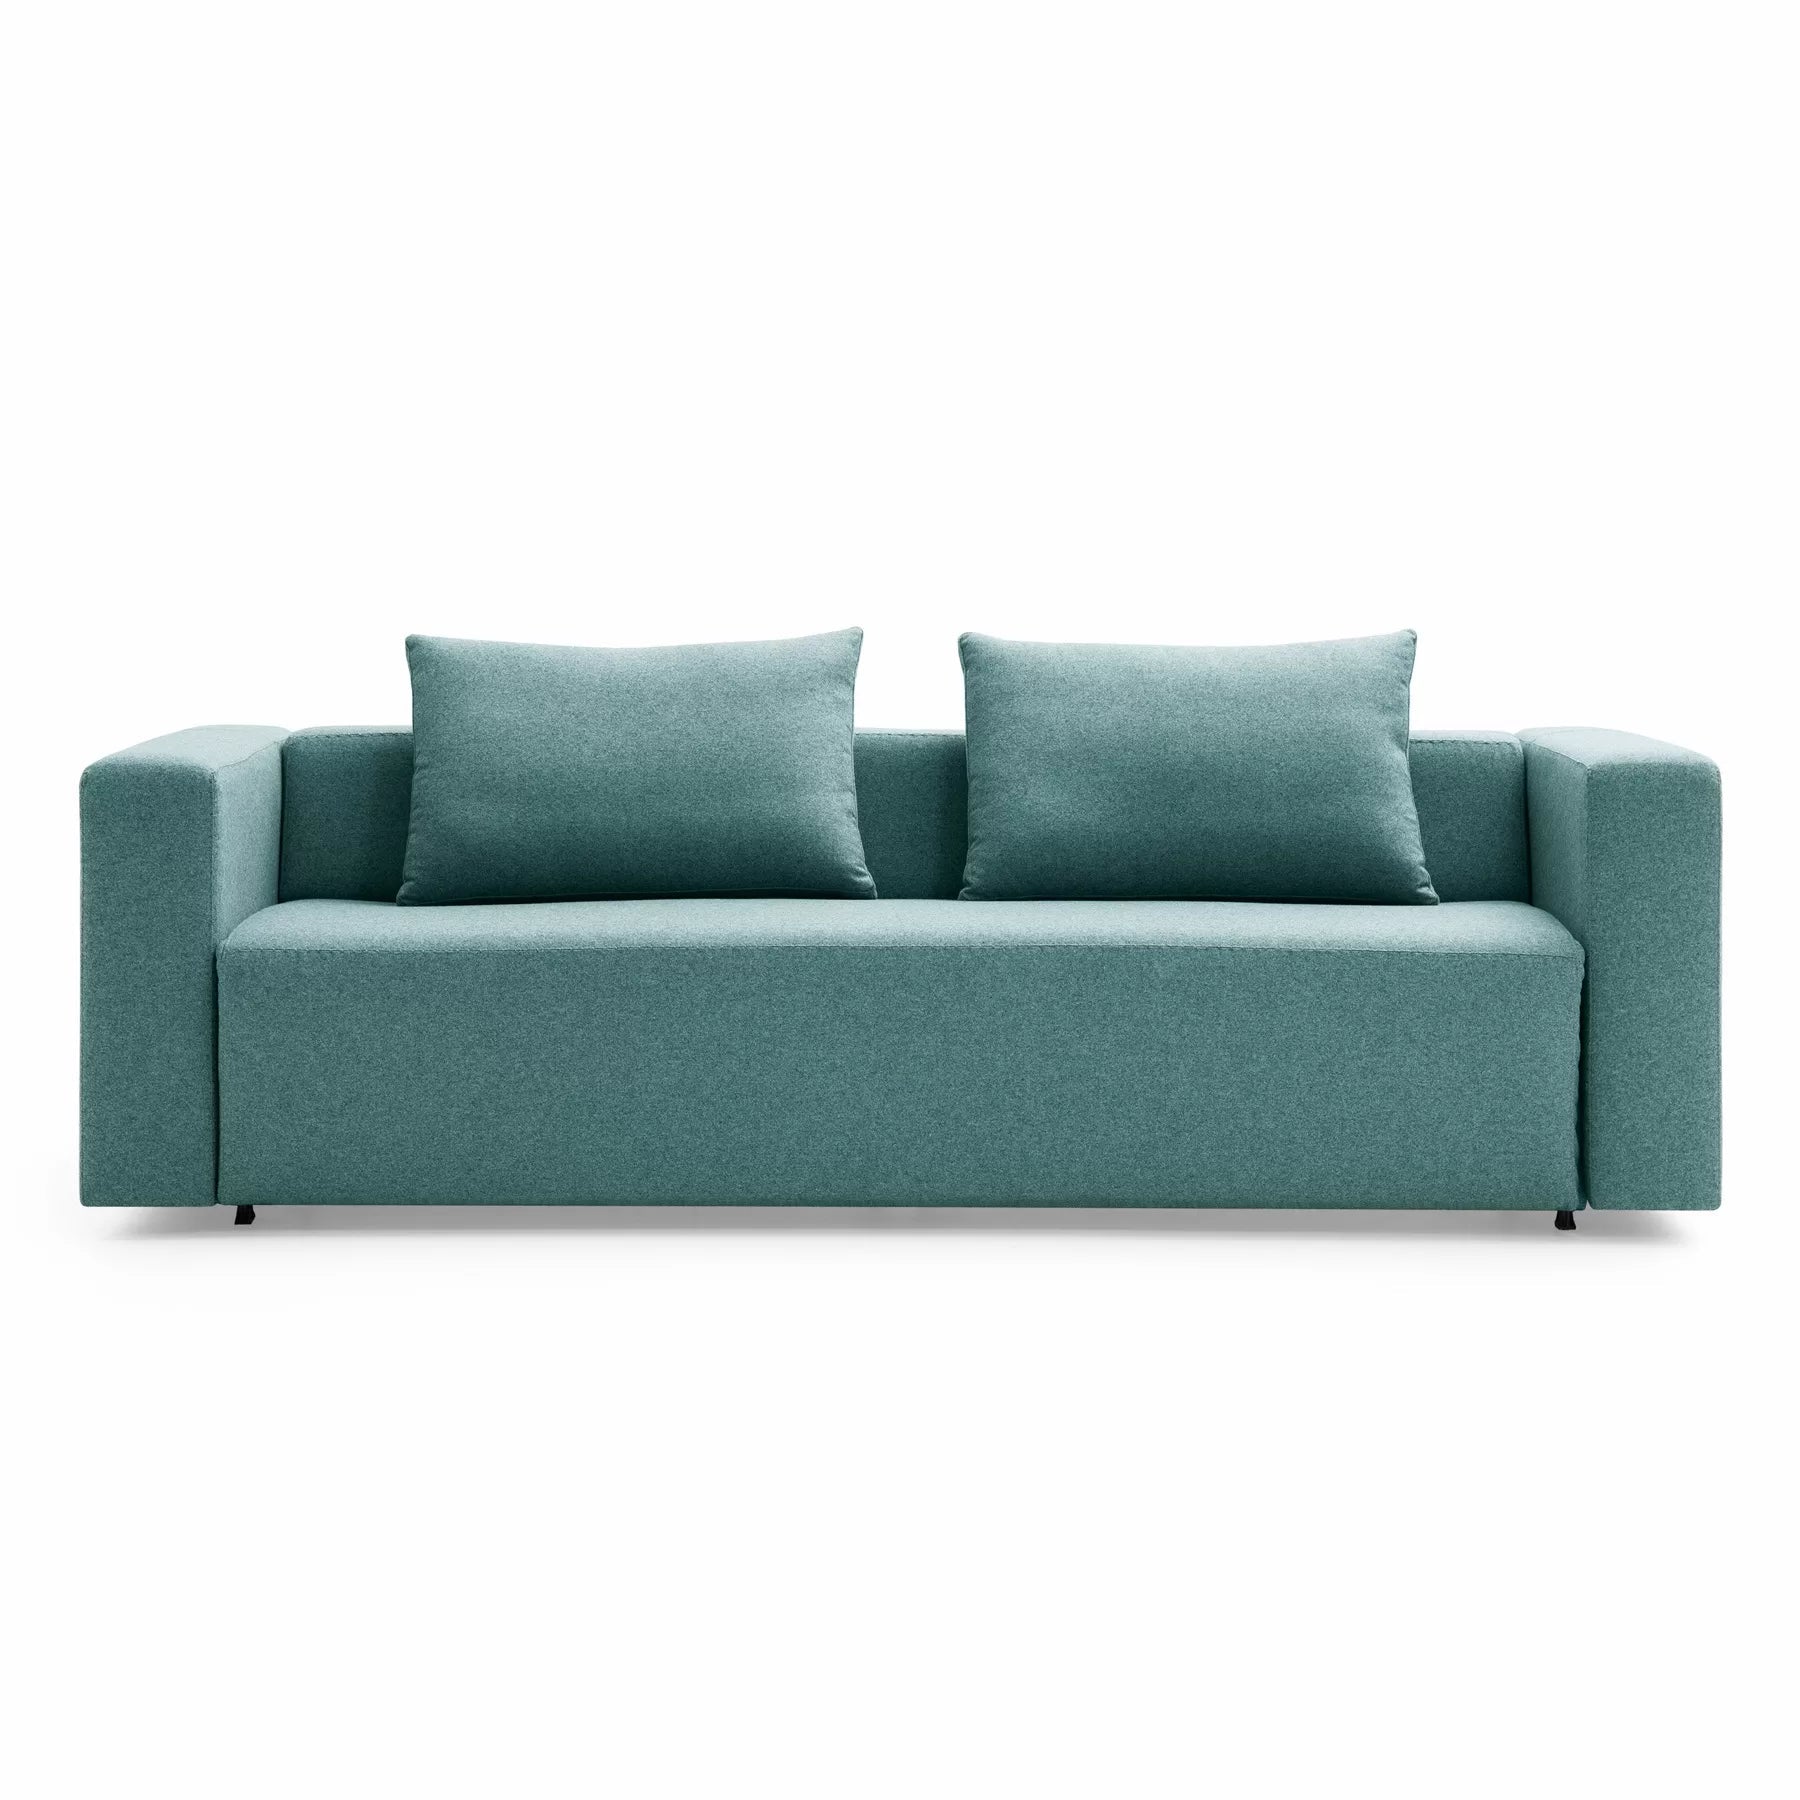 Pillow 943 Sofa Bed-TM Leader-Contract Furniture Store